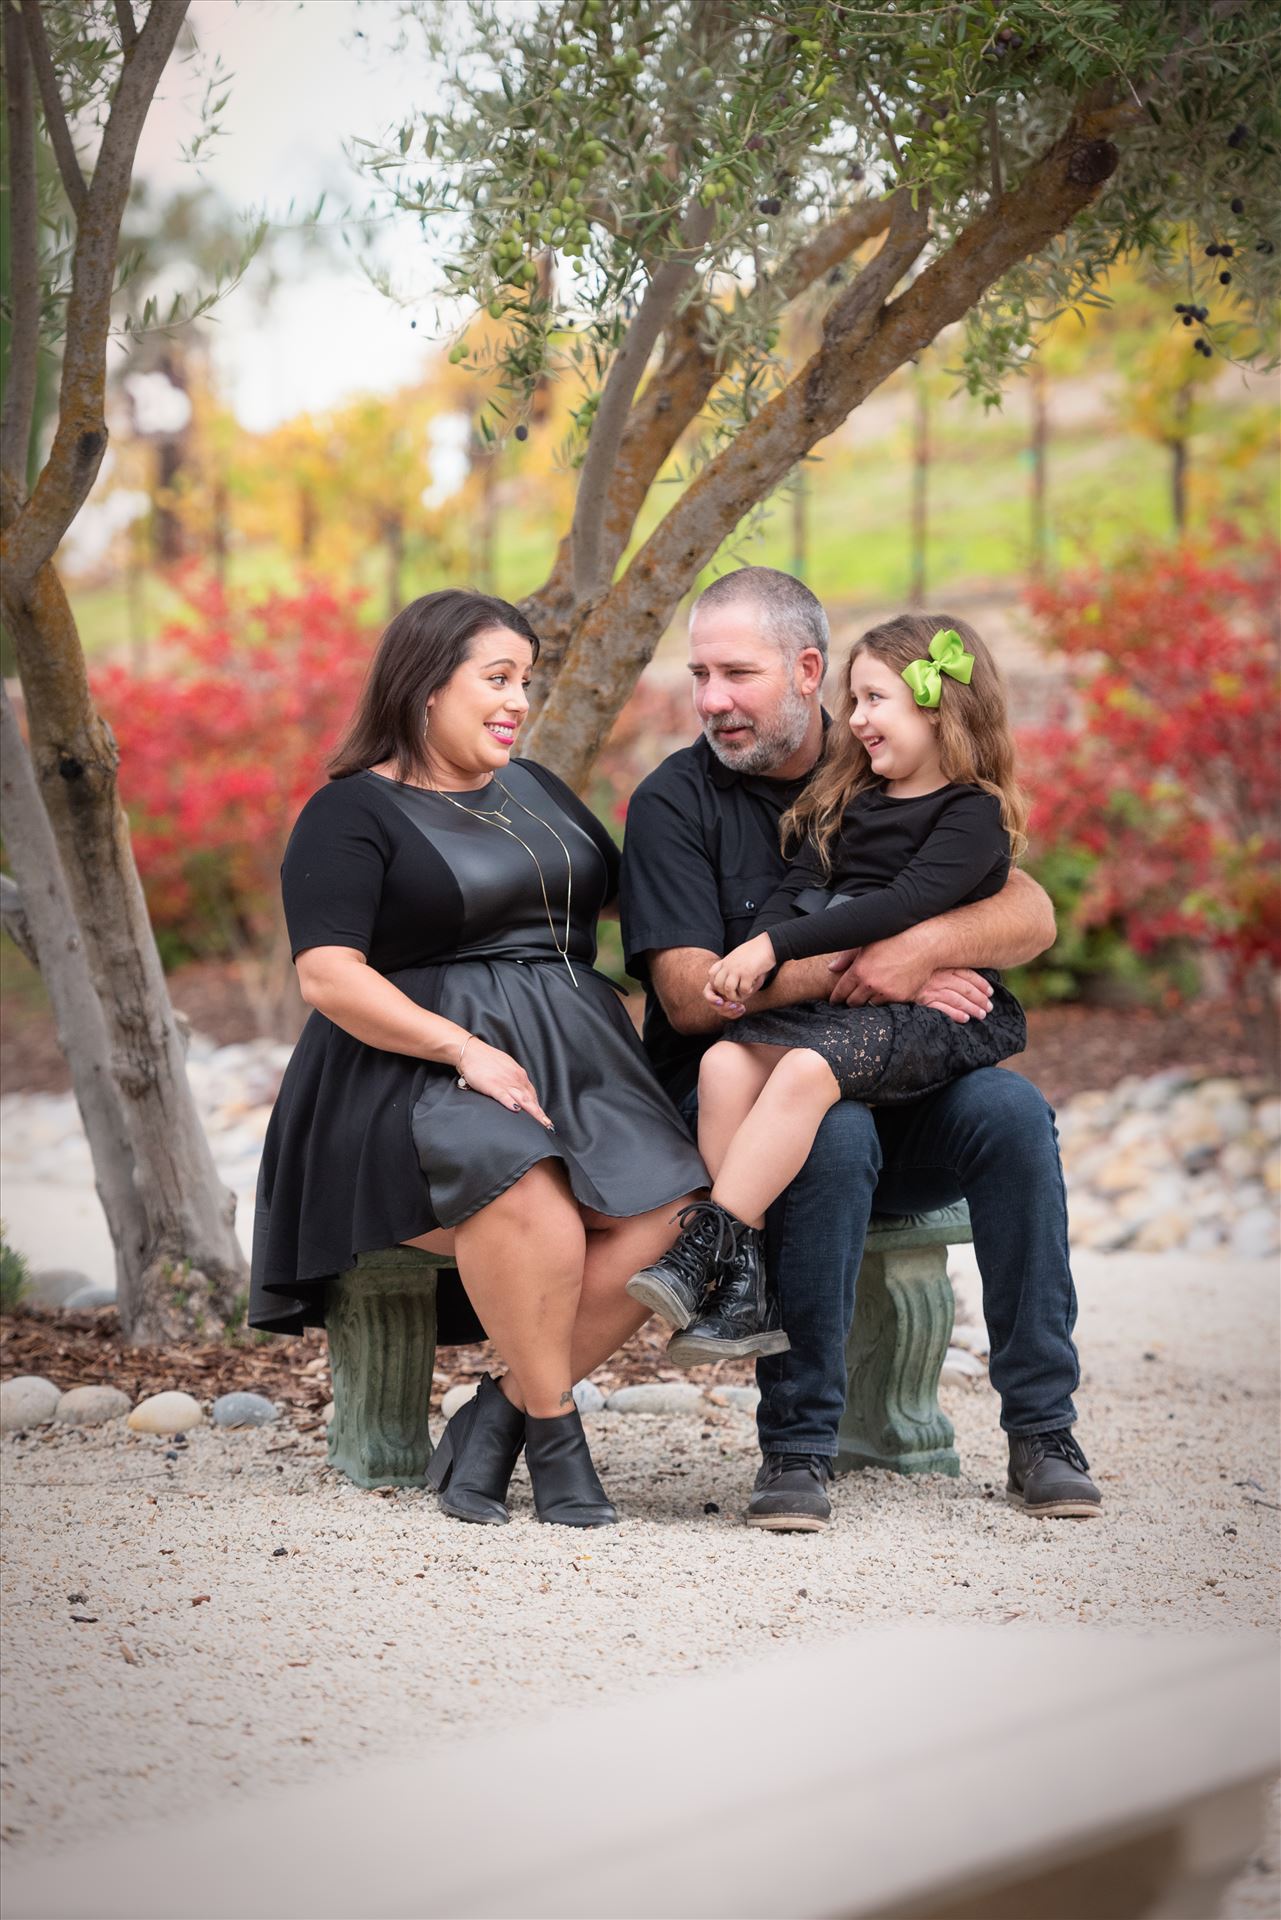 Final-.JPG Sarah Williams of Mirror's Edge Photography, a San Luis Obispo Wedding, Engagement and Portrait Photographer, captures the Foster Family Fall Session at the gorgeous Allegretto Resort and Vineyards in Paso Robles, California. Fall Colors. by Sarah Williams